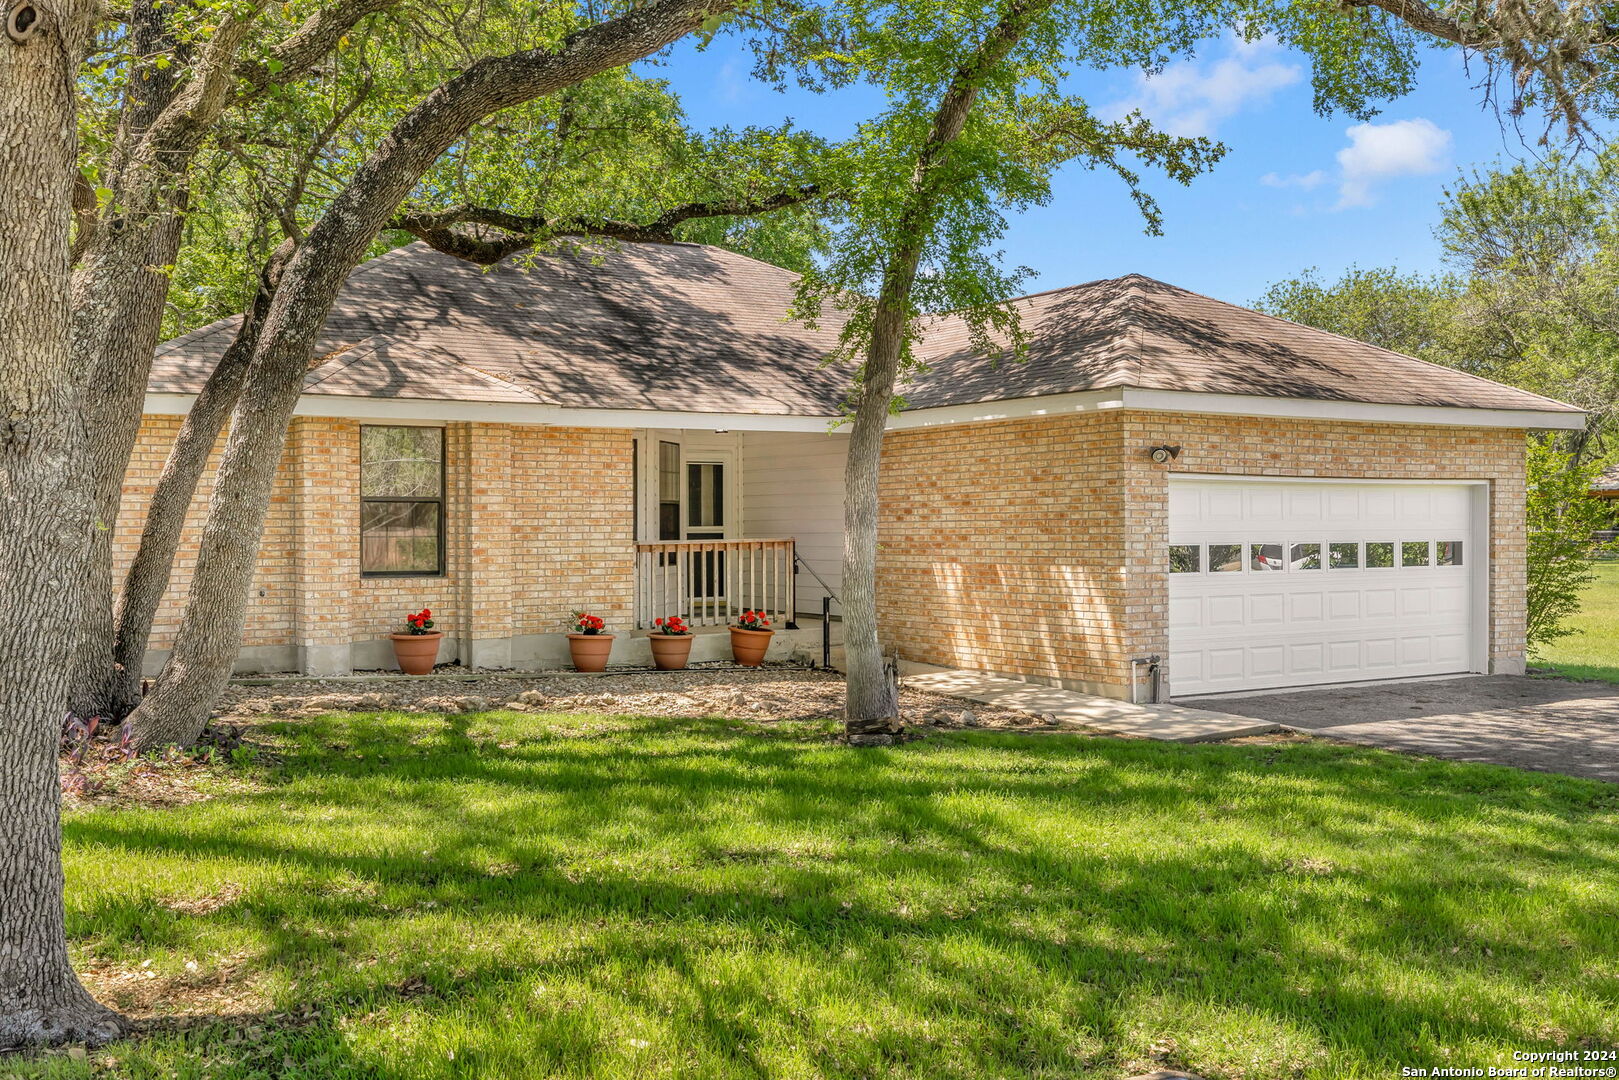 Photo of 605 Whitetail Dr in San Marcos, TX